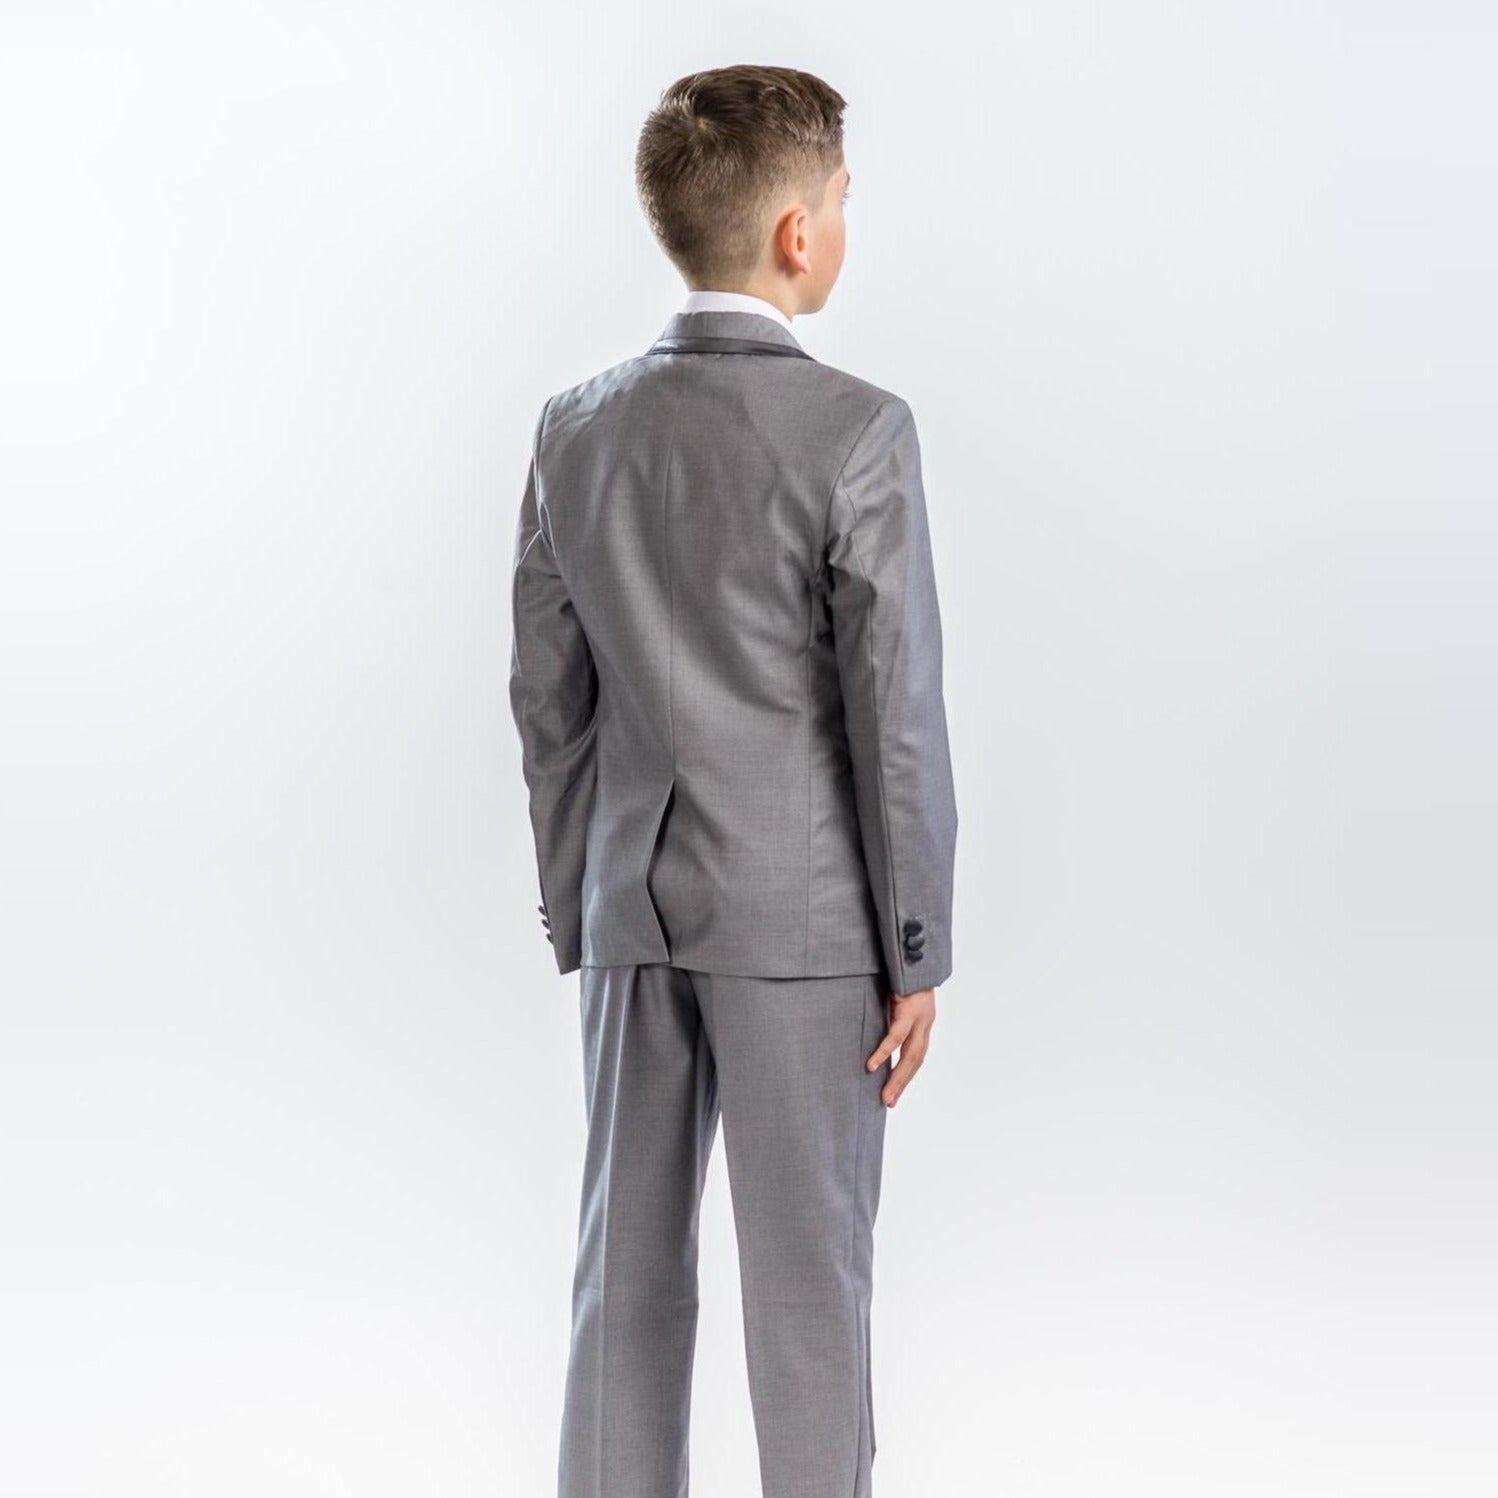 The Noble One Formal Boys Suit